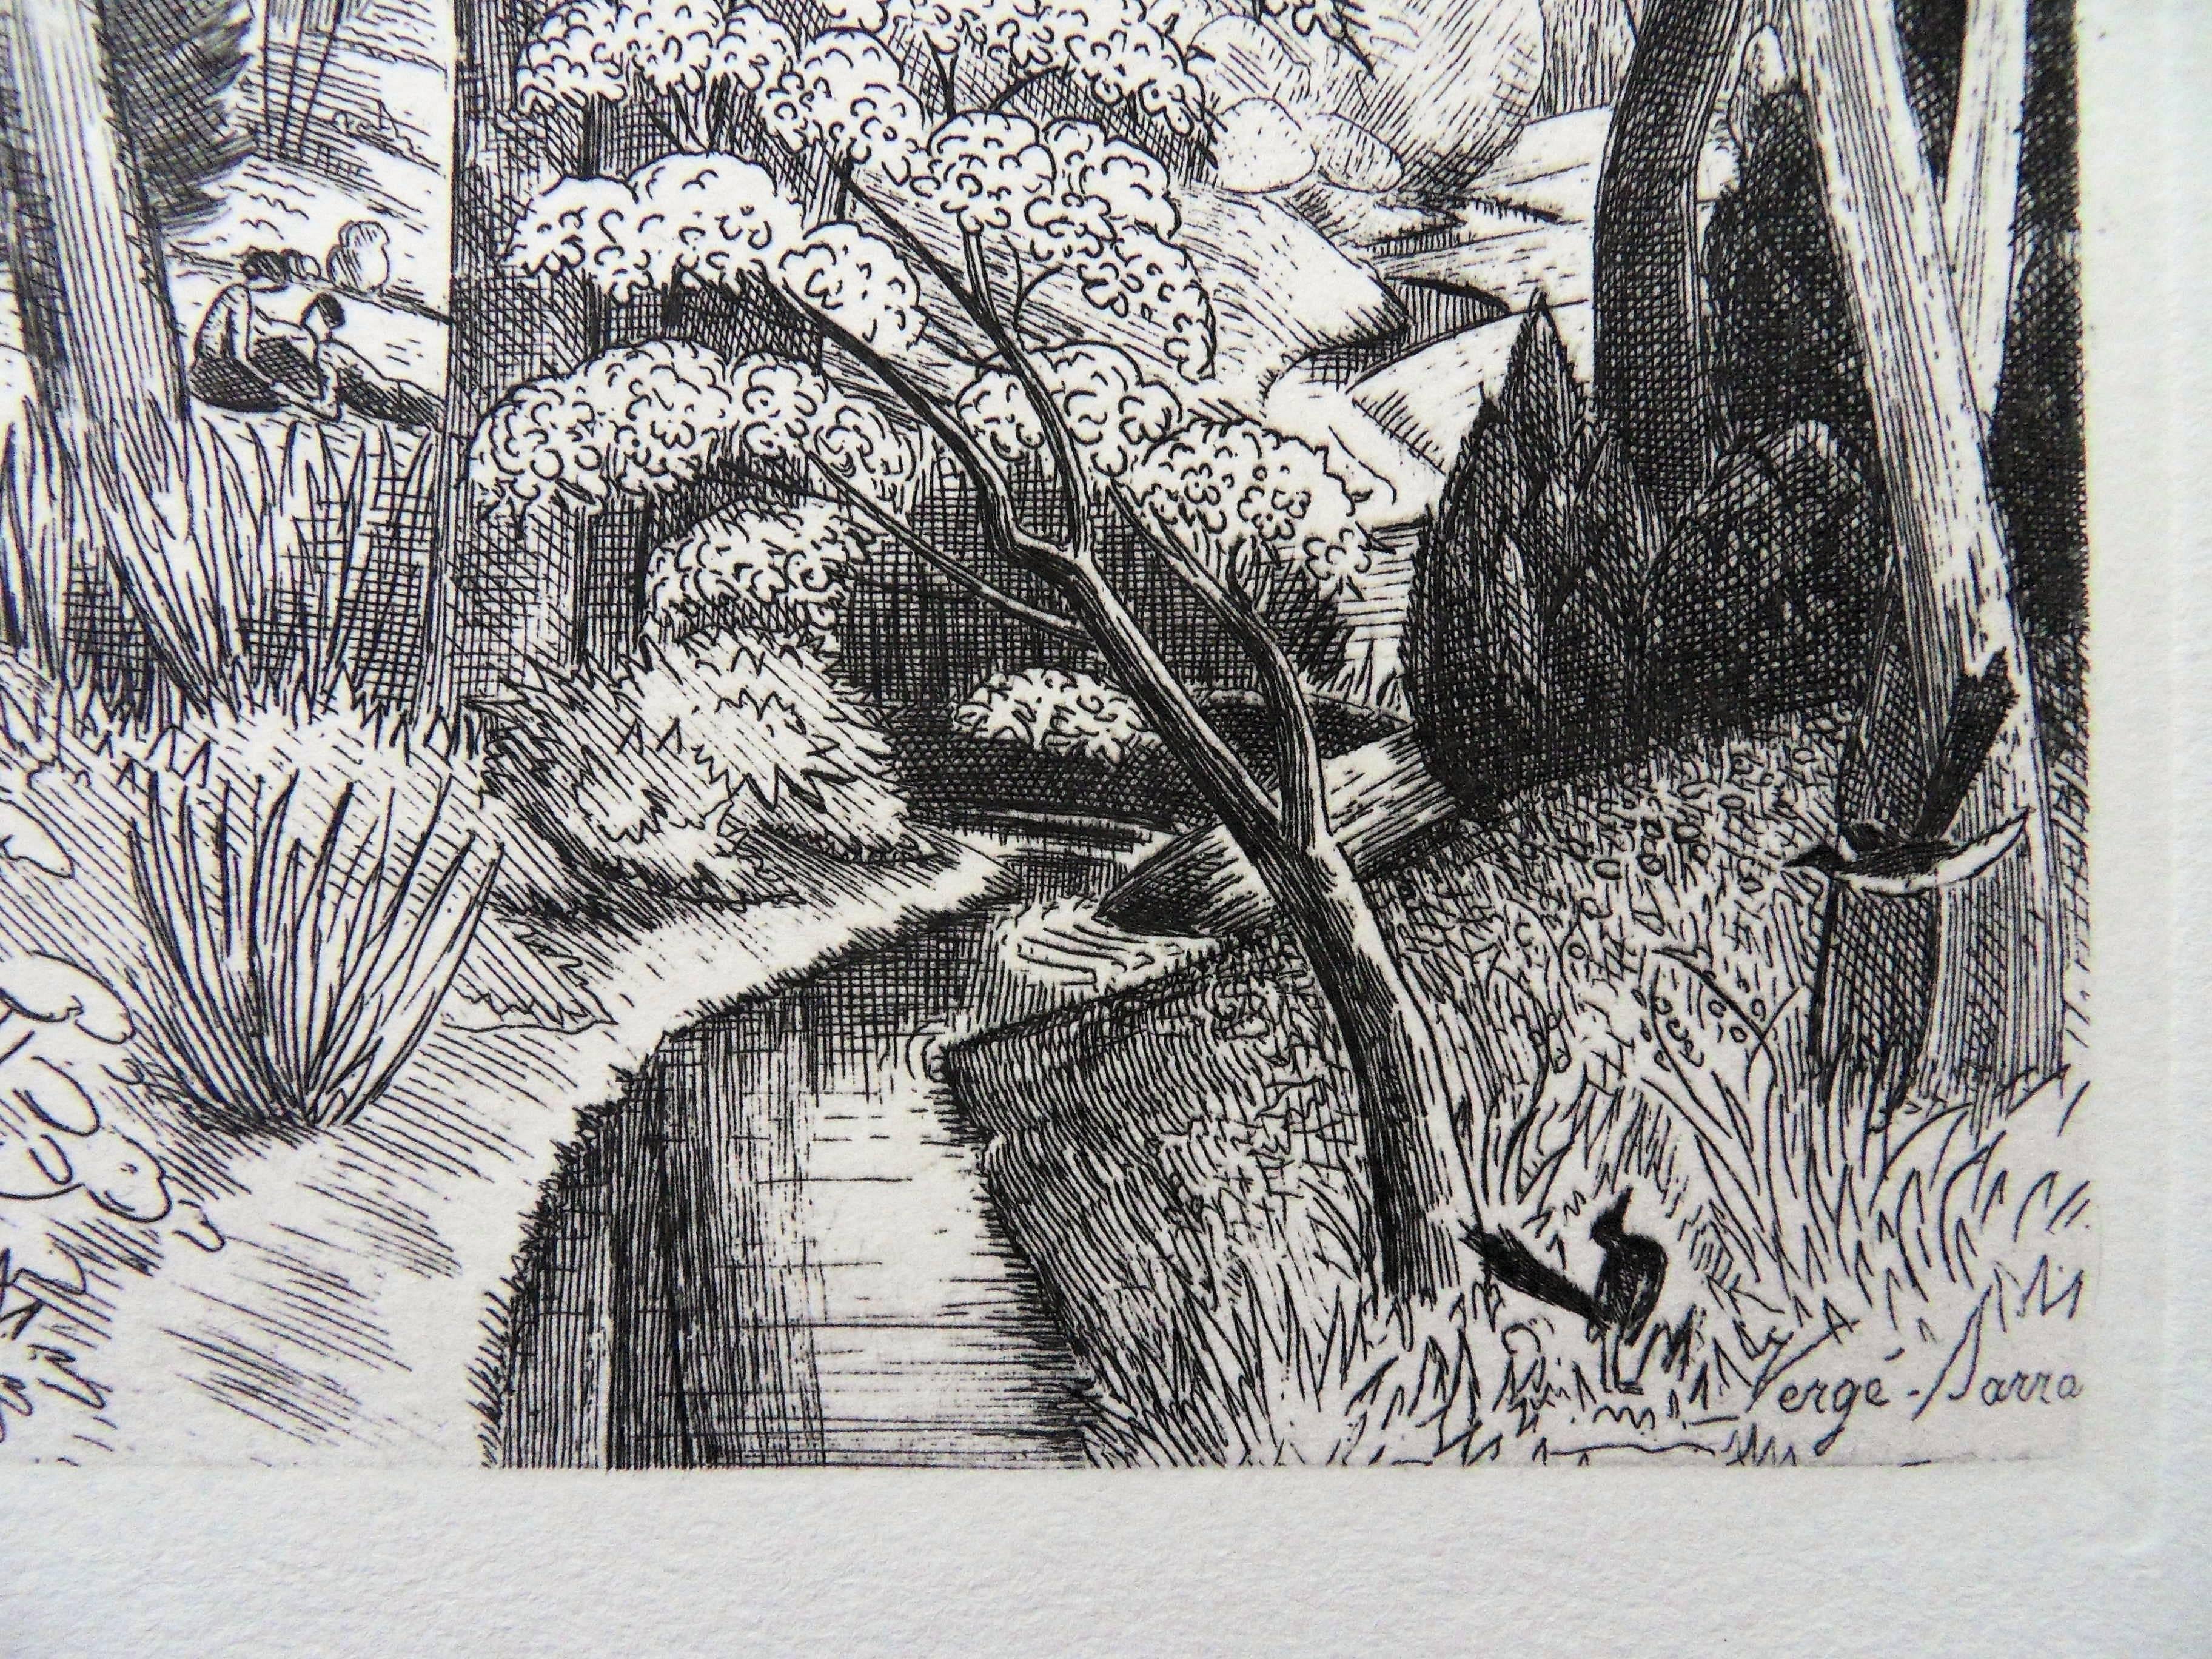 Magpie Near a River - Original etching, 1943 - Print by André Jacquemin